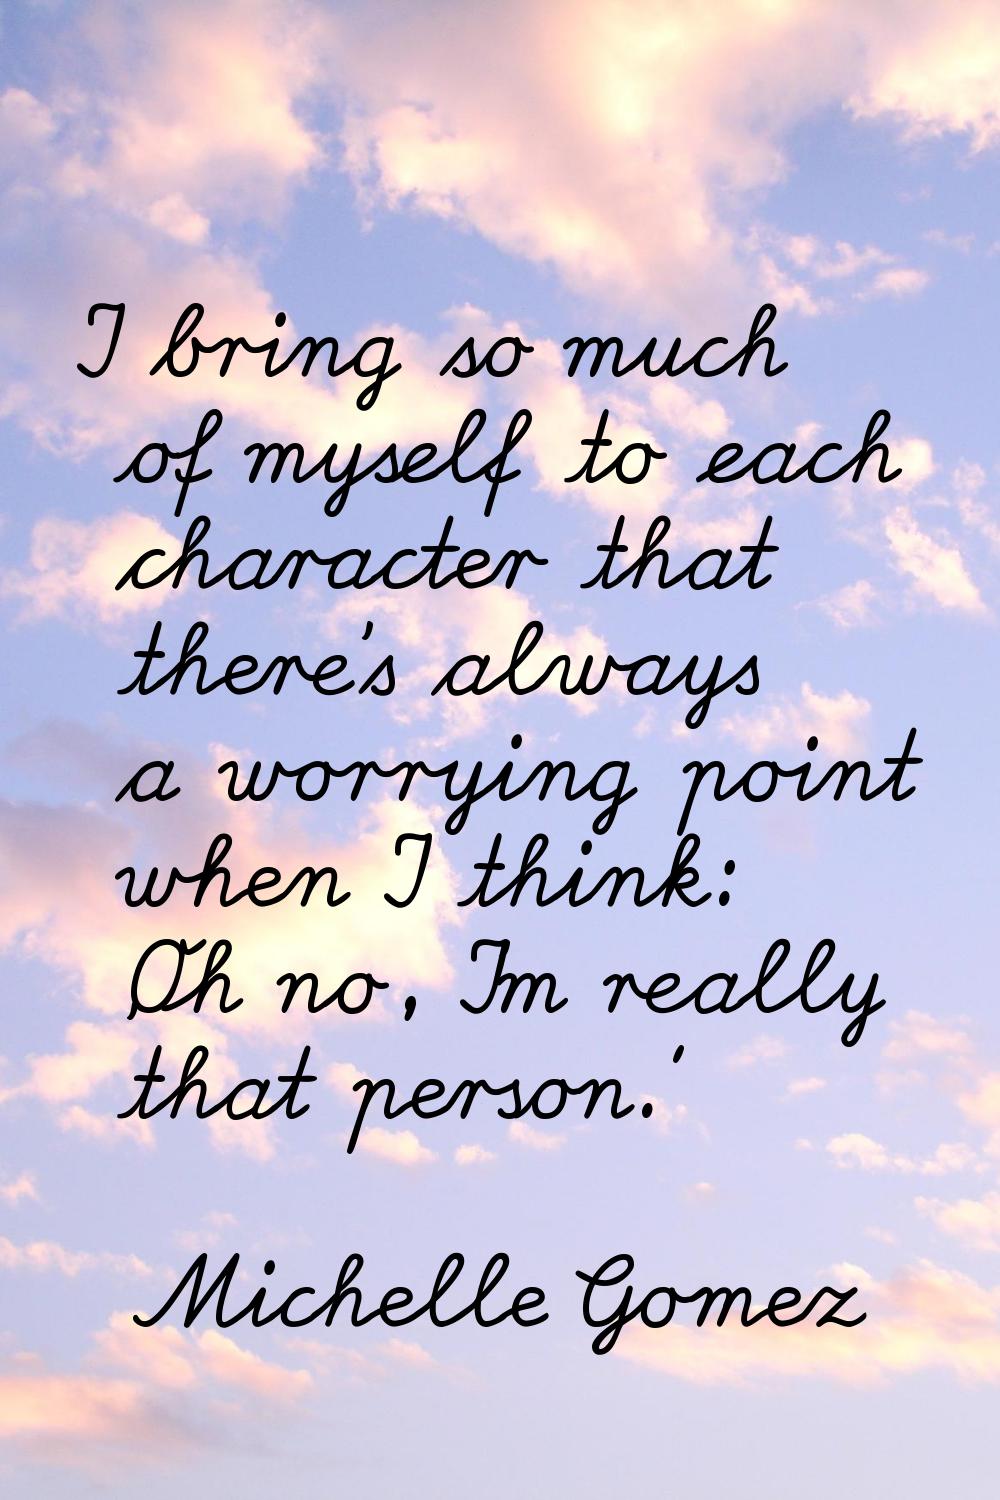 I bring so much of myself to each character that there's always a worrying point when I think: 'Oh 